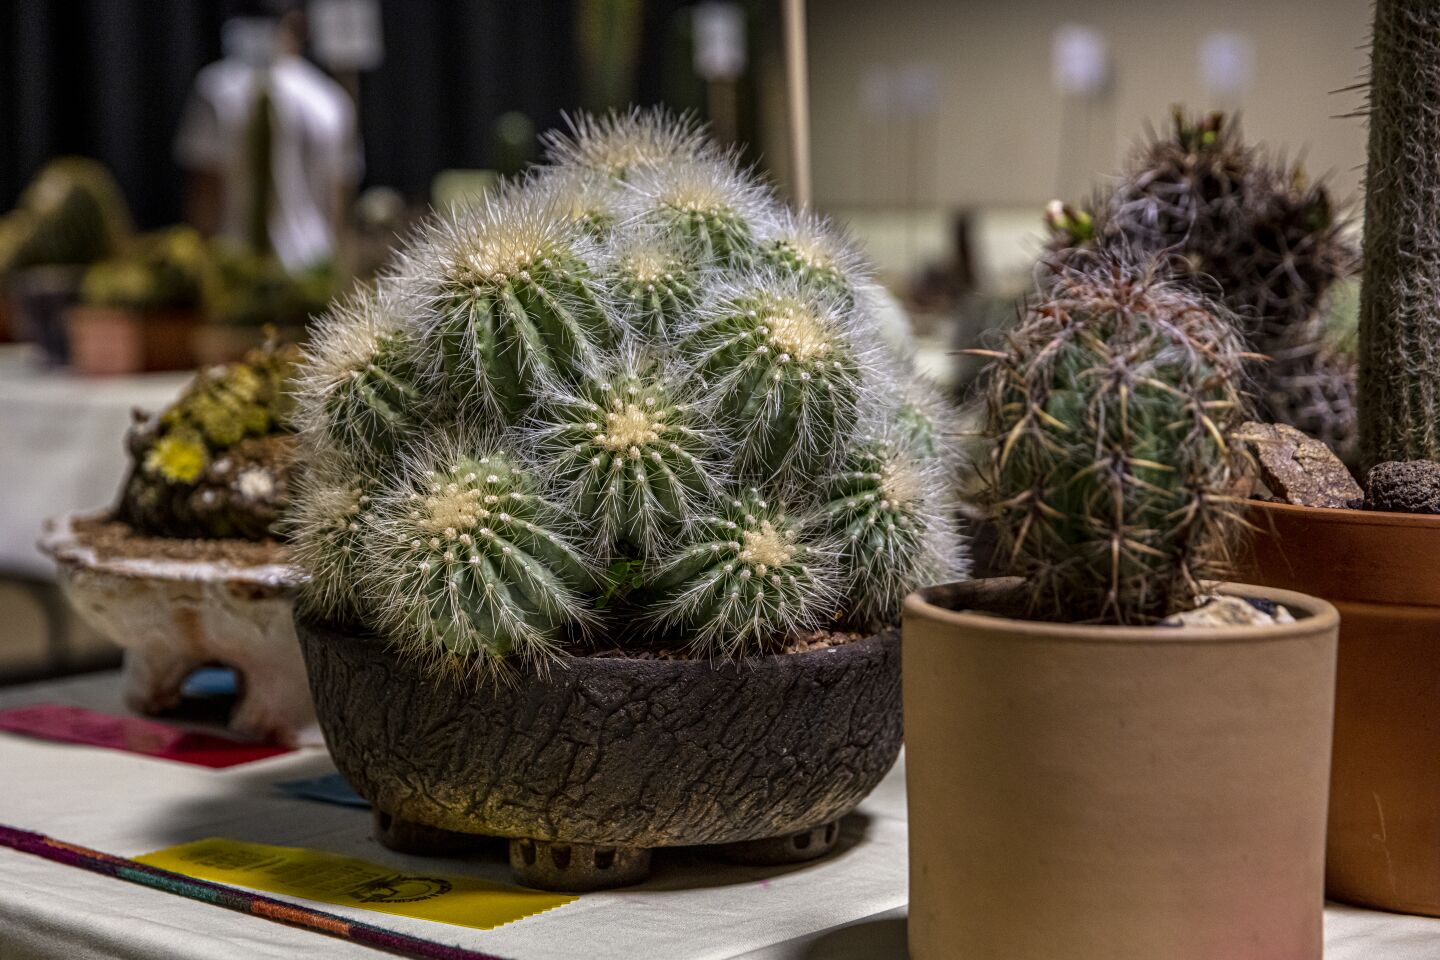 Peter Walkowiak's prickly bundle of Copiapoa krainziana was another top prize winner at the convention. Walkowiak's soil recipe is comprised of 20% compost, 20% decomposed granite and 60% wet perlite, so he always plants in damp soil.